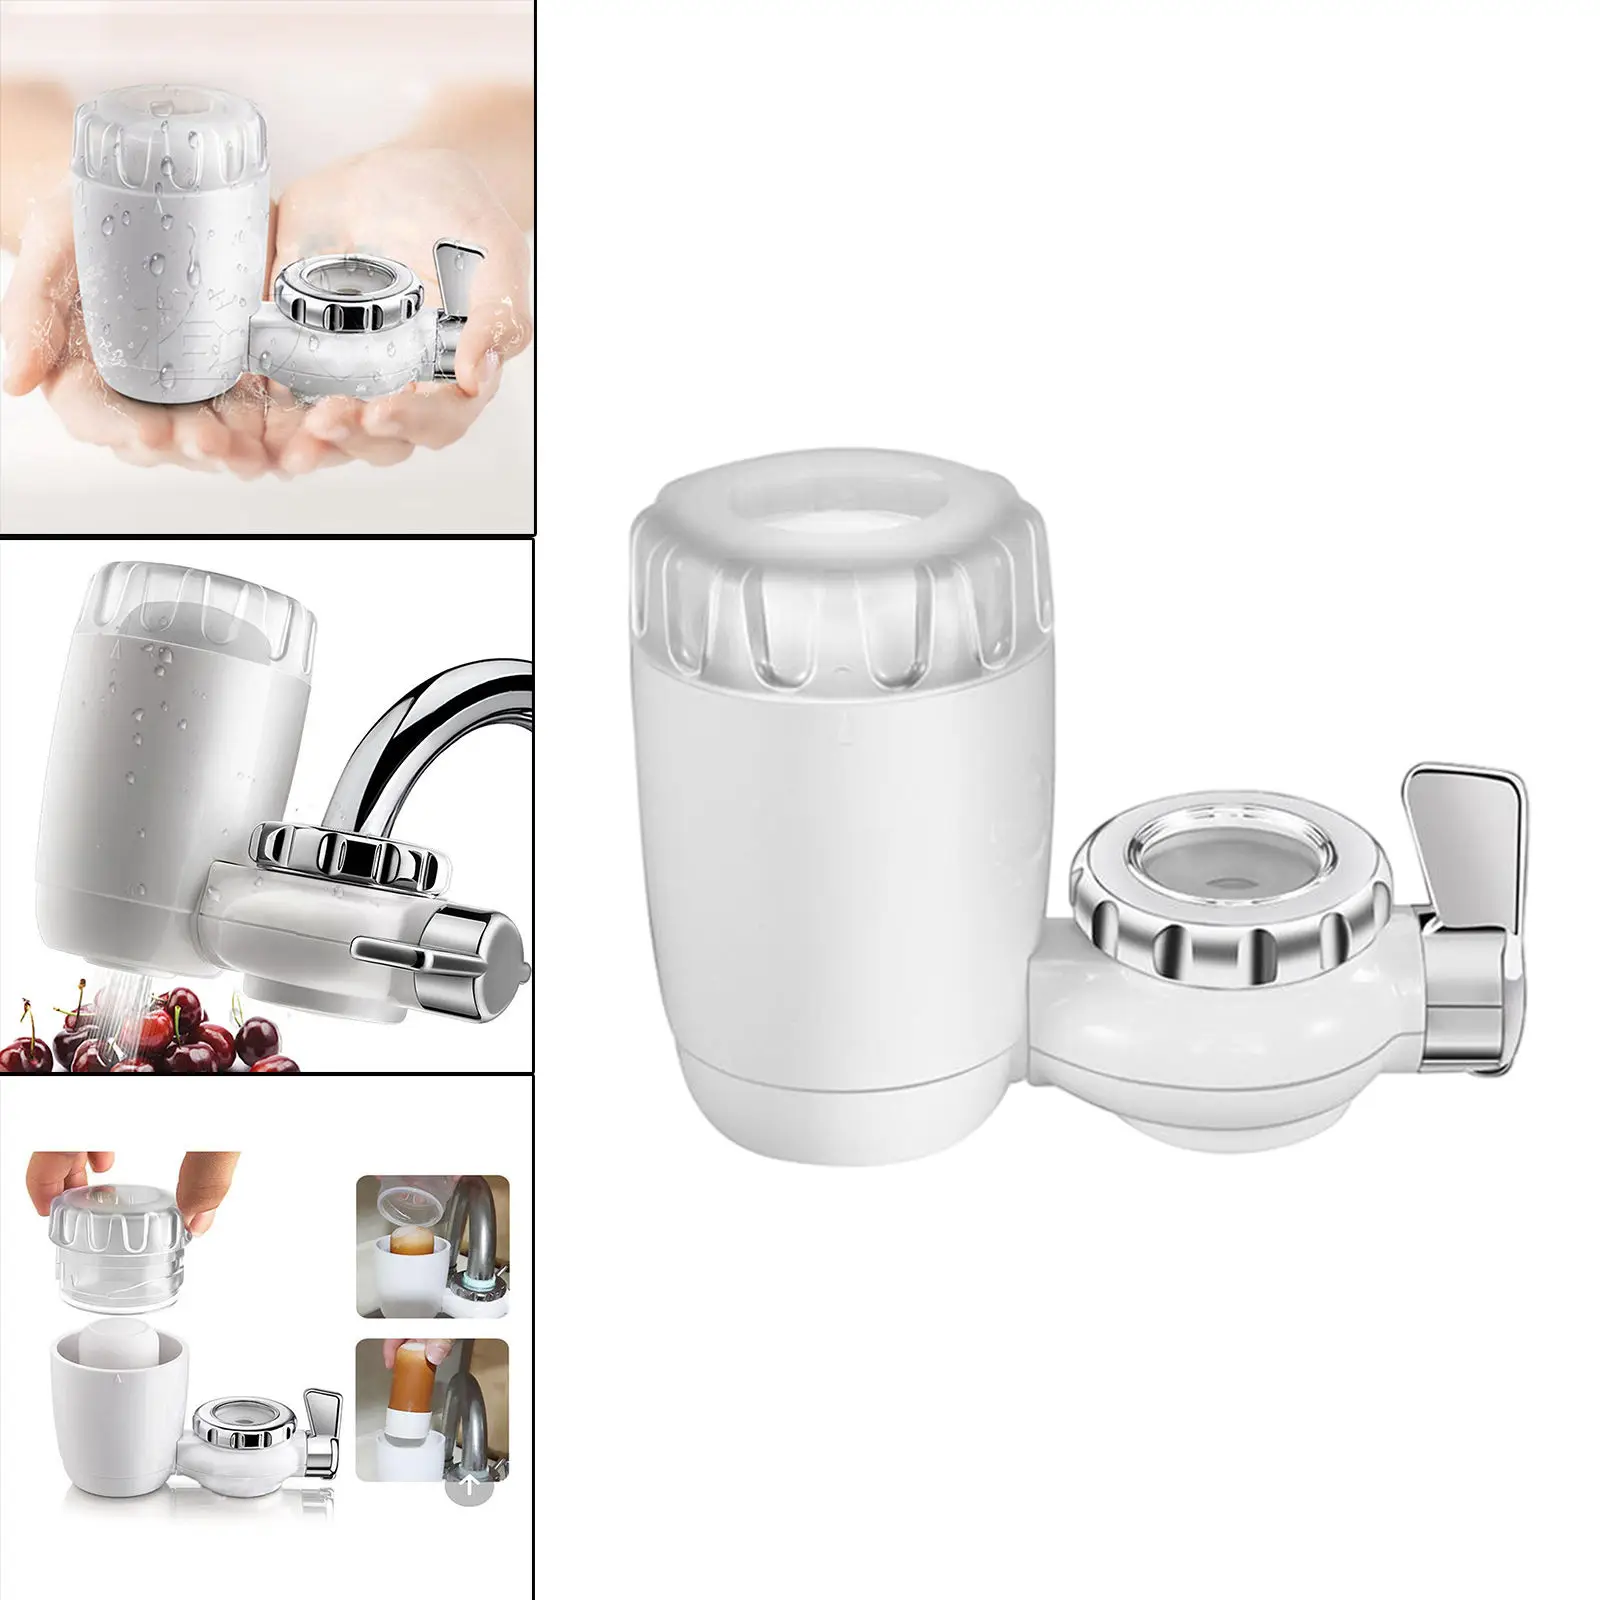 Tap Water Purifier Clean Kitchen Faucet Washable Ceramic Percolator Water Filter Filtro Replacement Filter